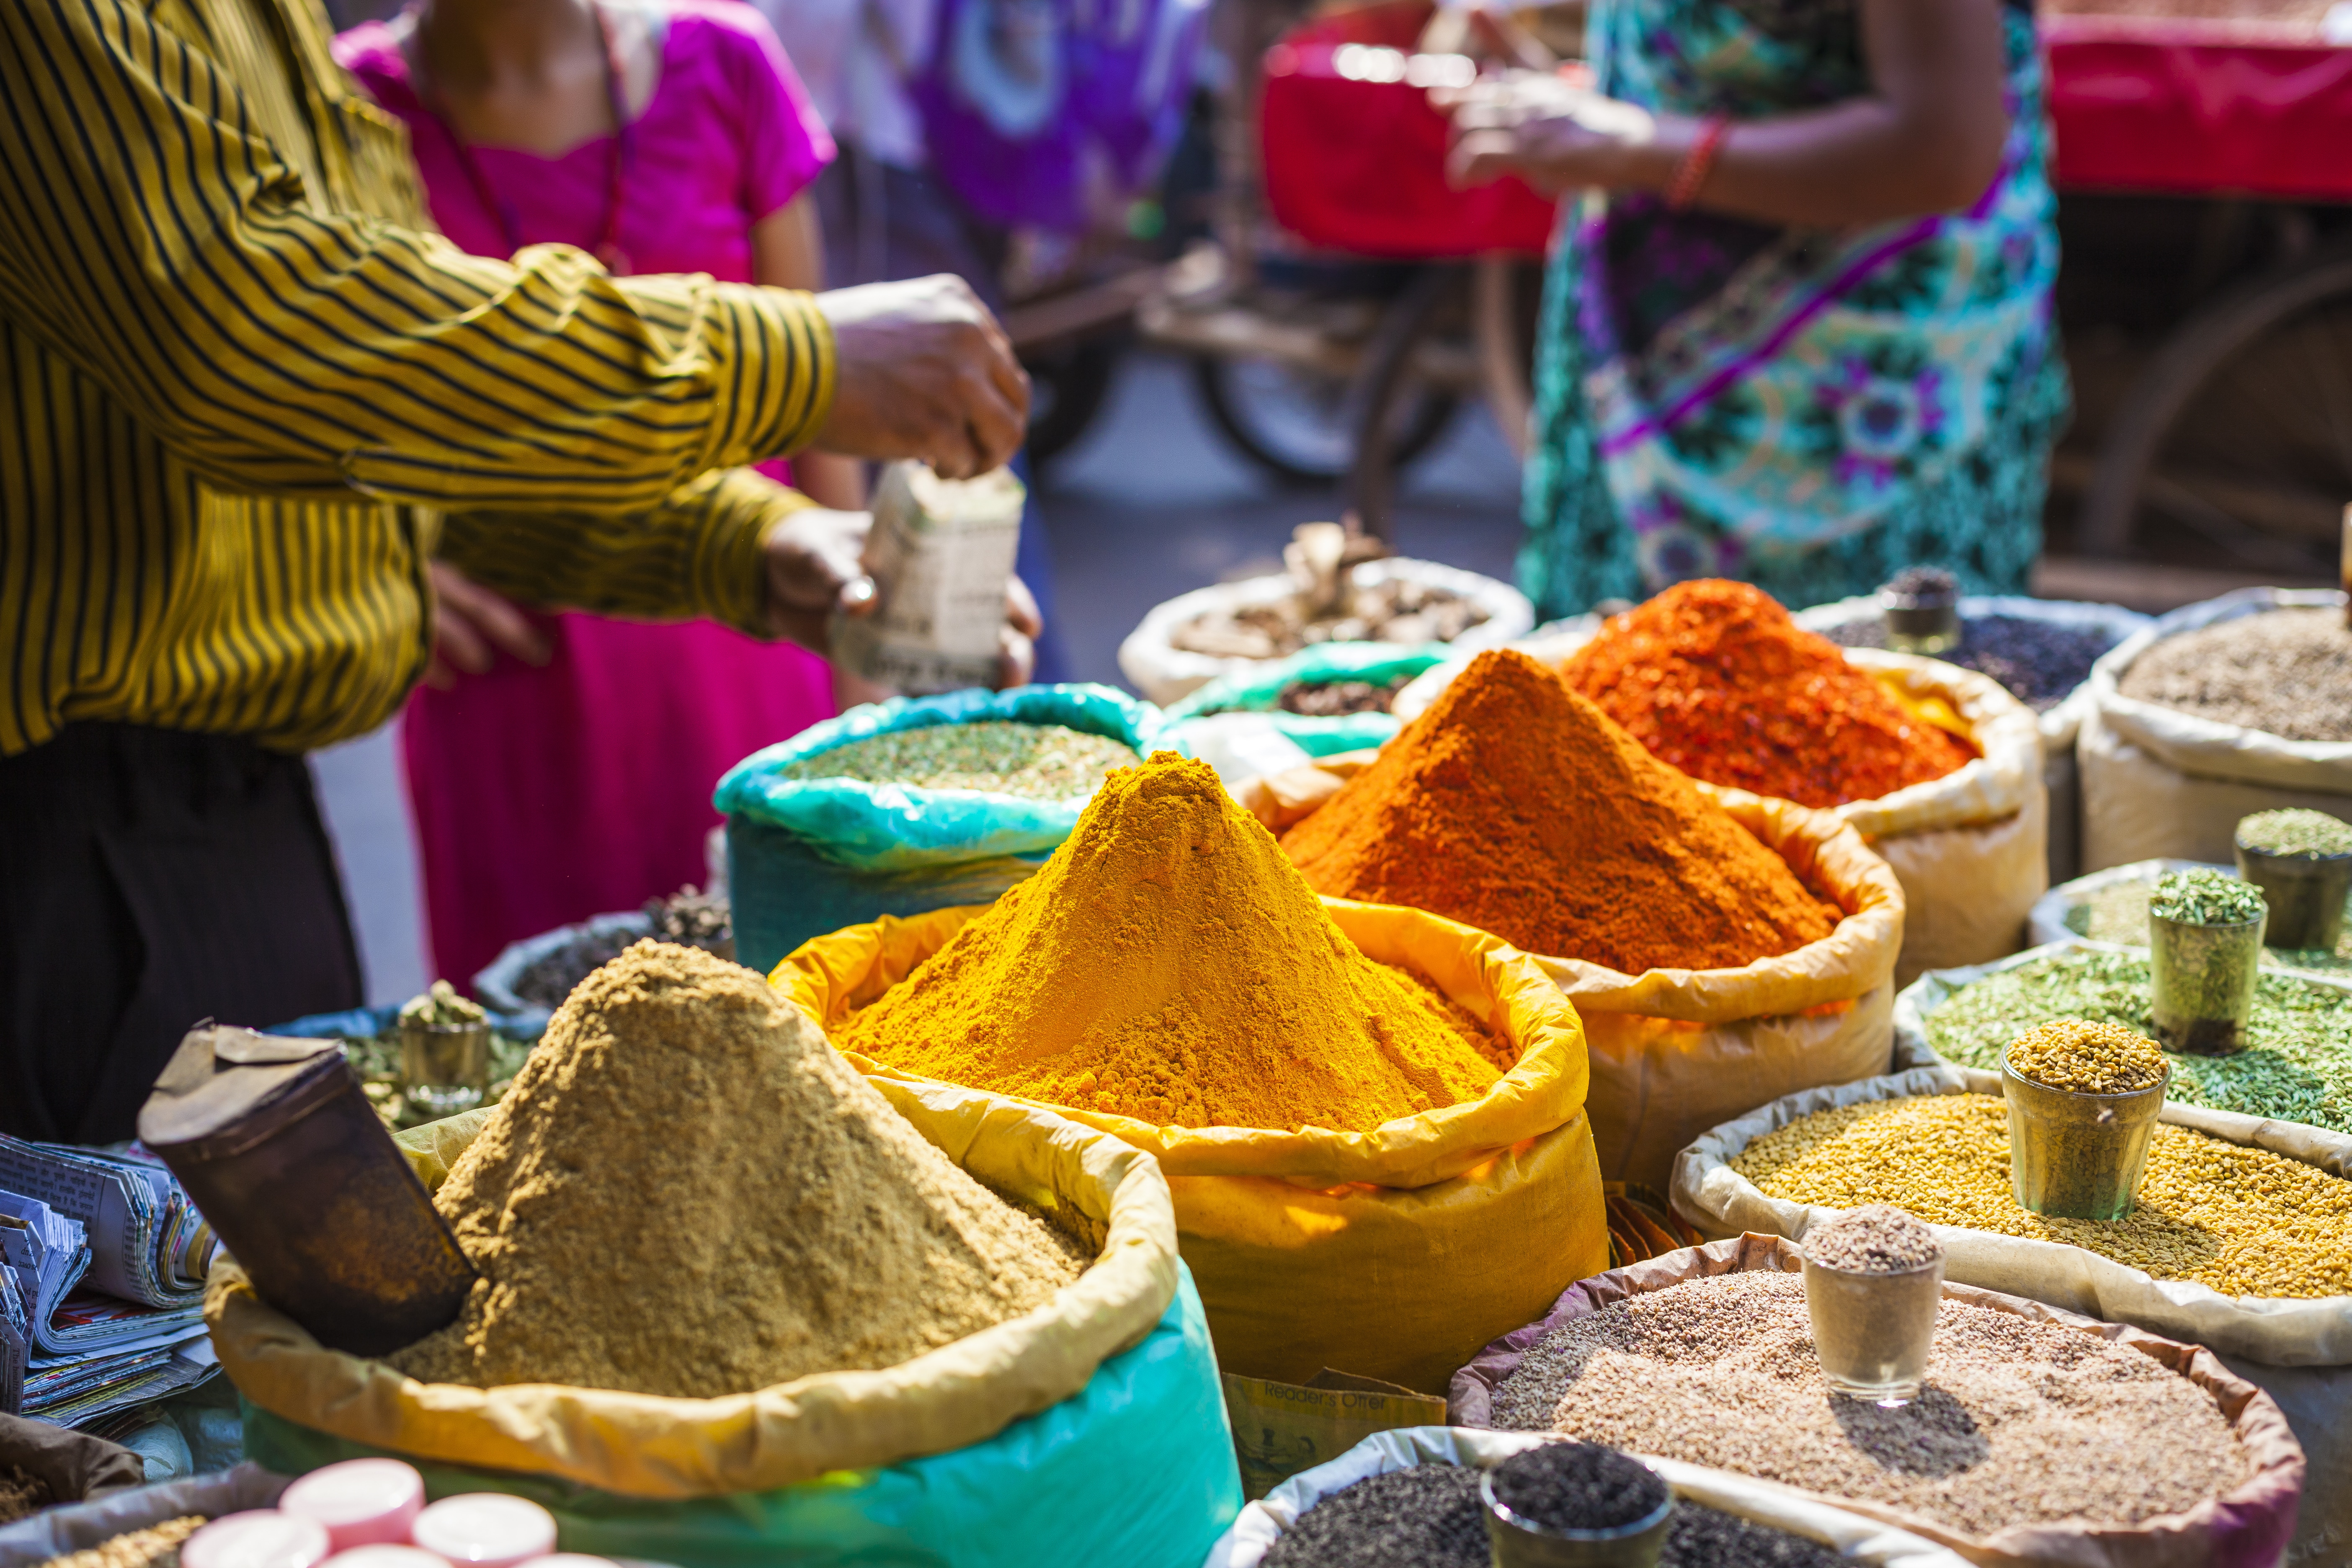 SAP Offers Nedspice Transparent Supply Chain  for Sustainable Growth